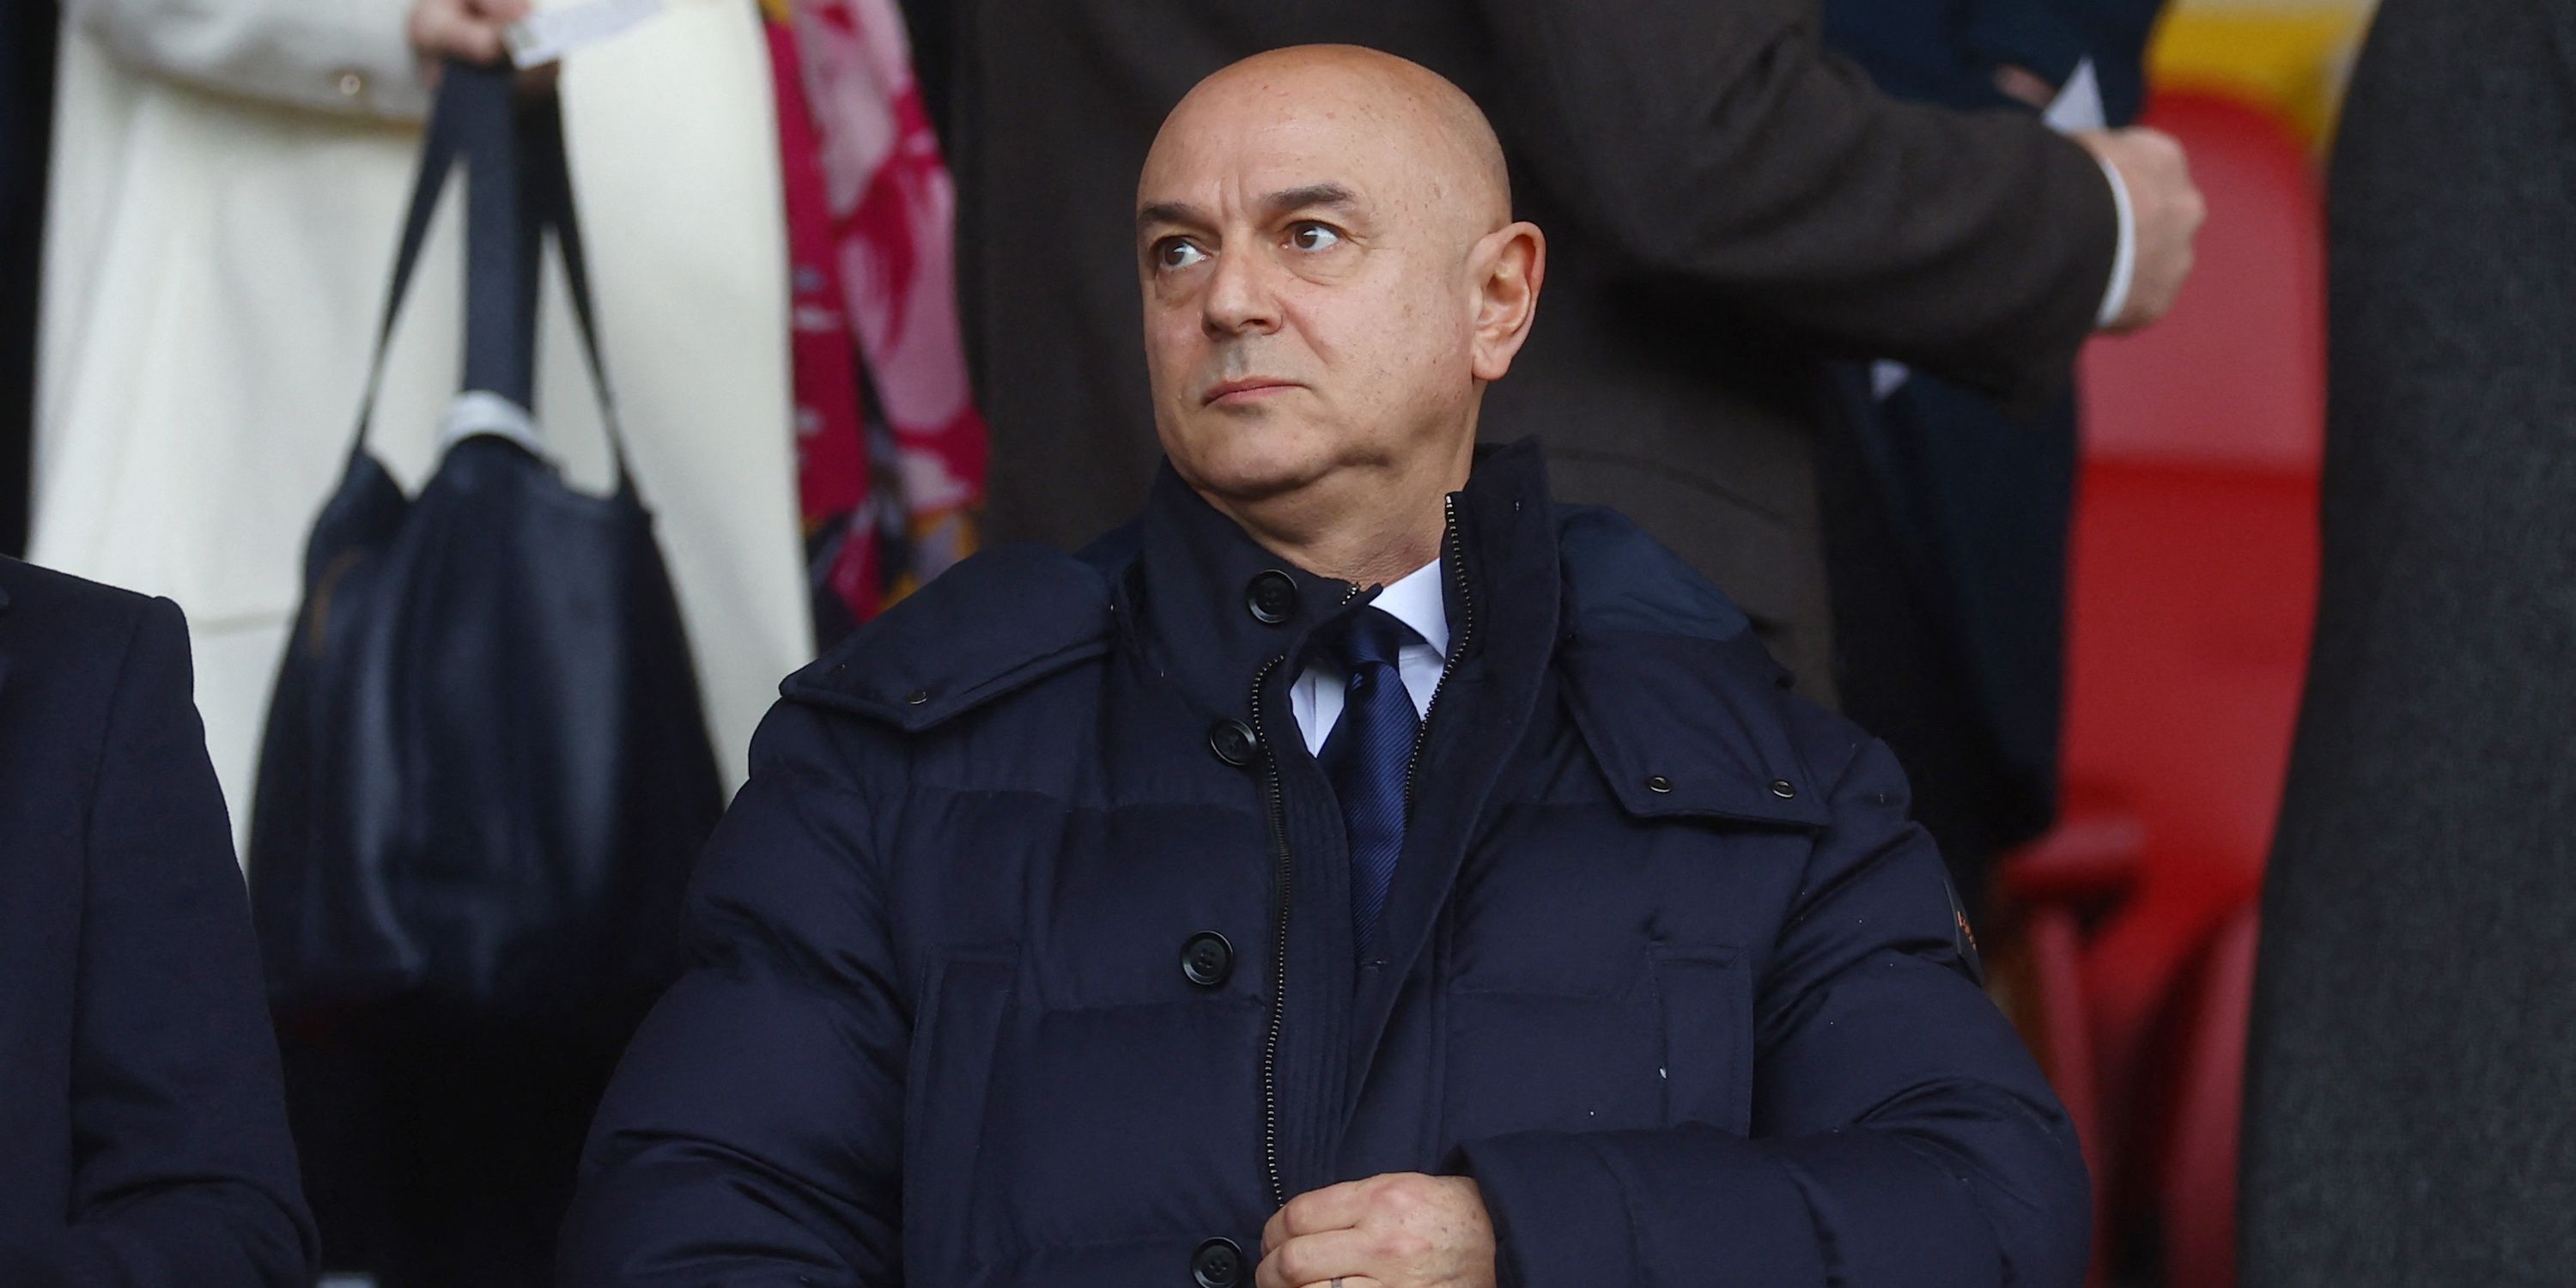 Tottenham Hotspur chairman Daniel Levy is pictured before the match